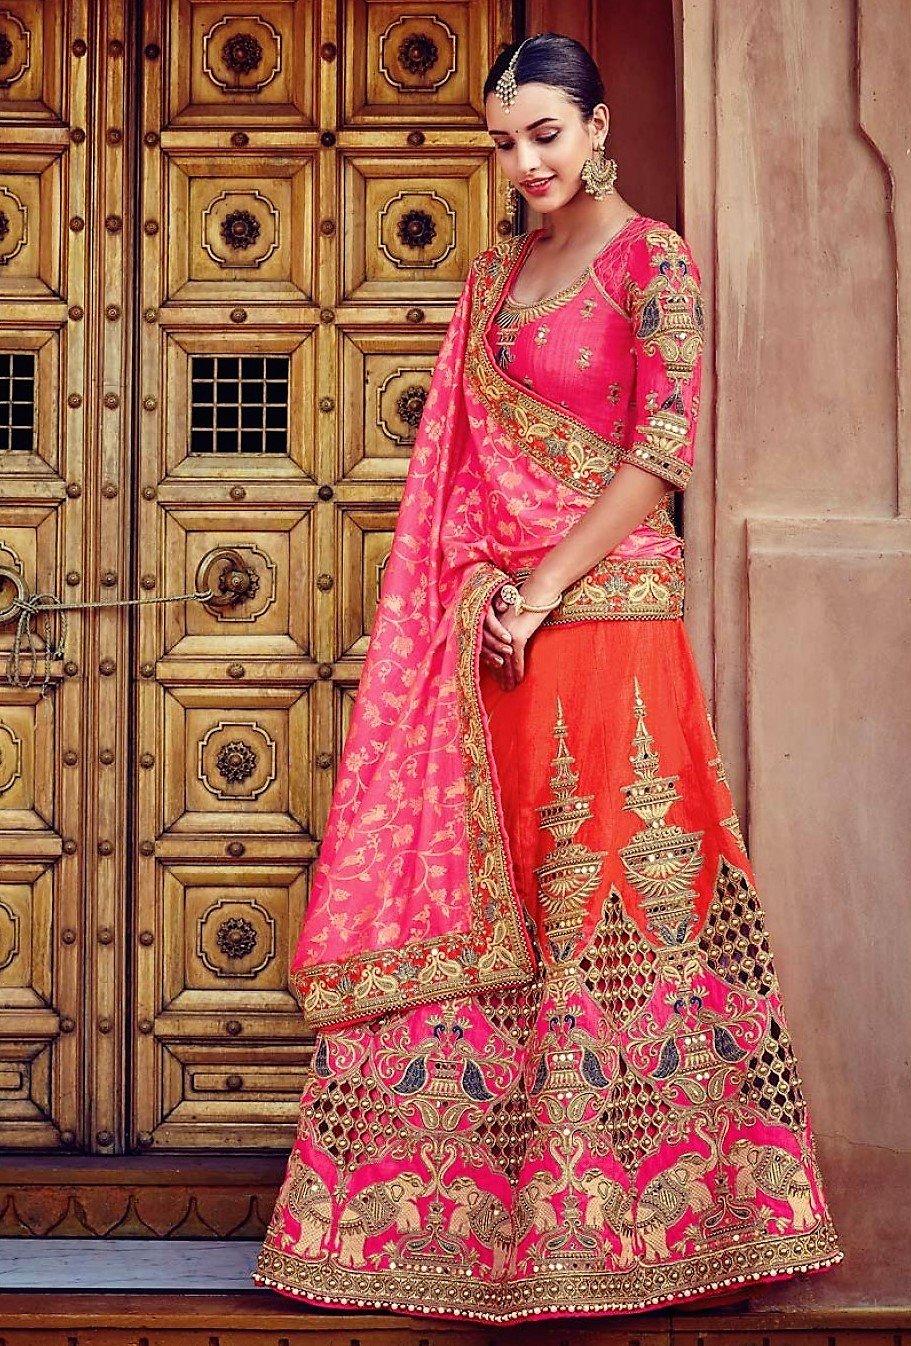 Lehenga Sarees - Buy Latest Collection of Lehenga Style Saree at Lowest  Price from Myntra